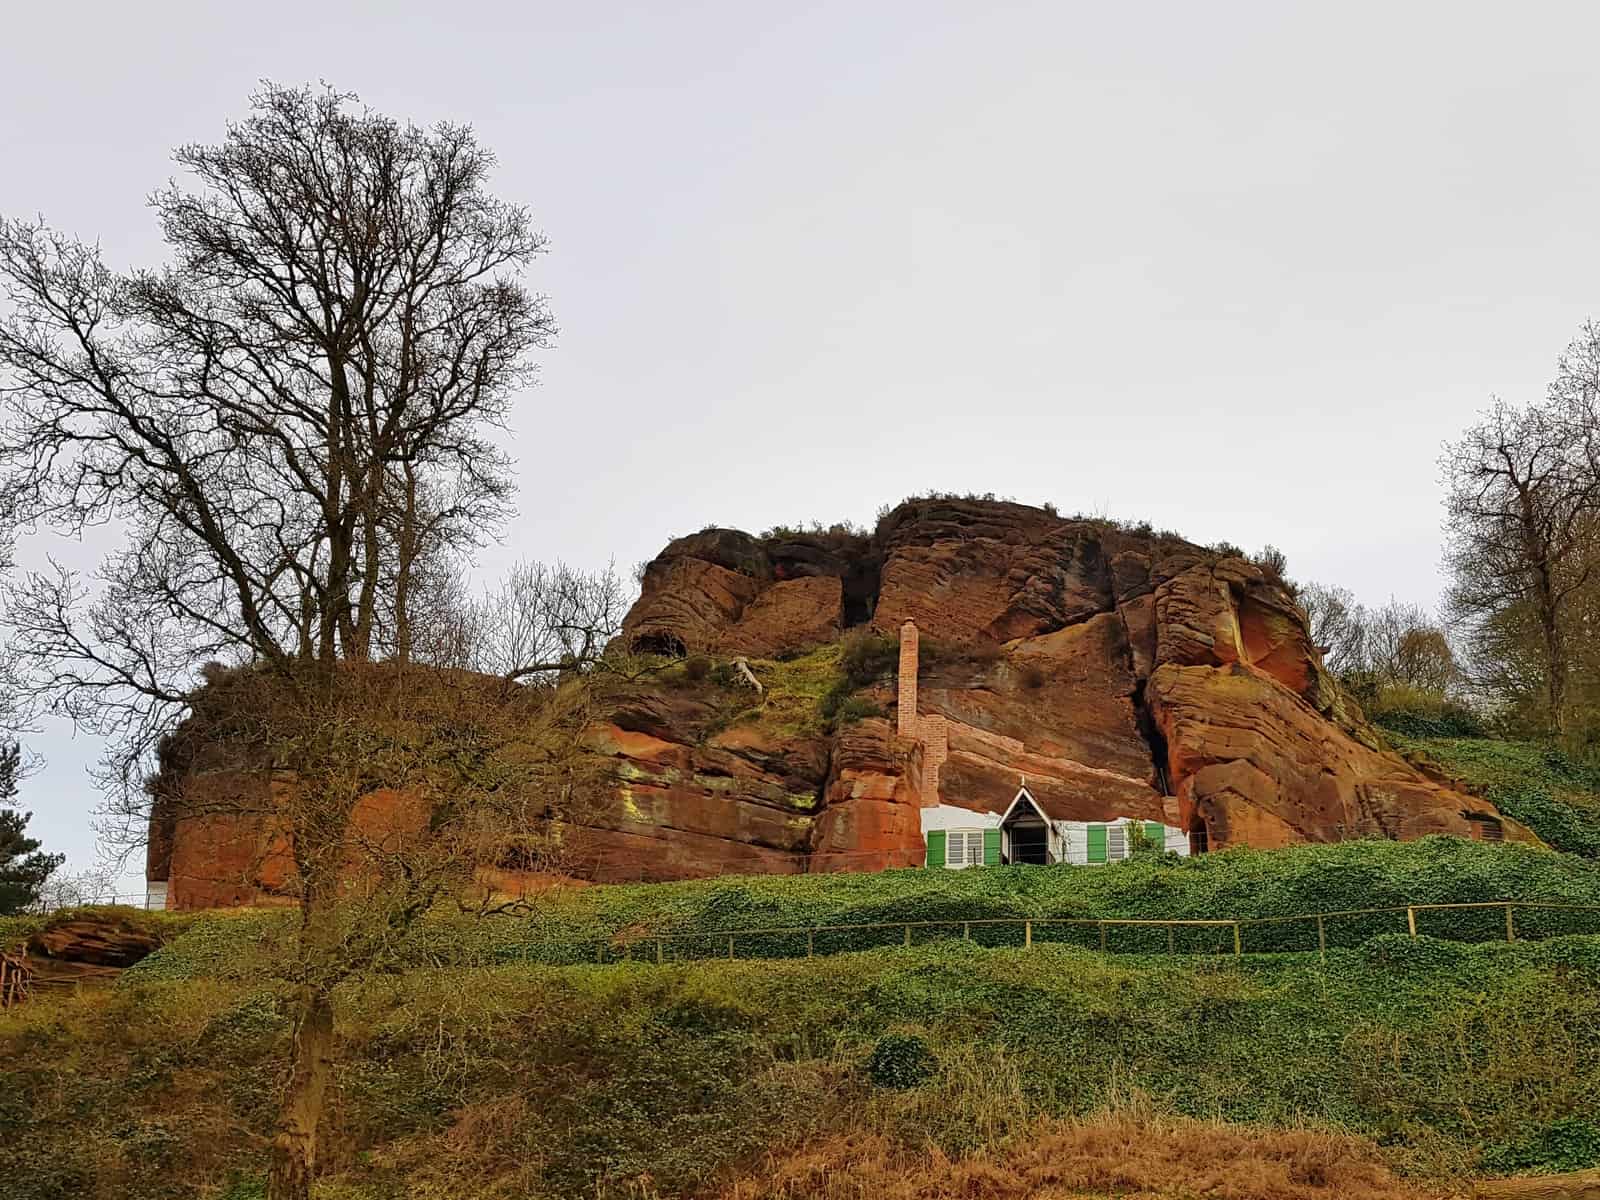 Dog friendly family day out at Kinver Edge and the Rock Houses